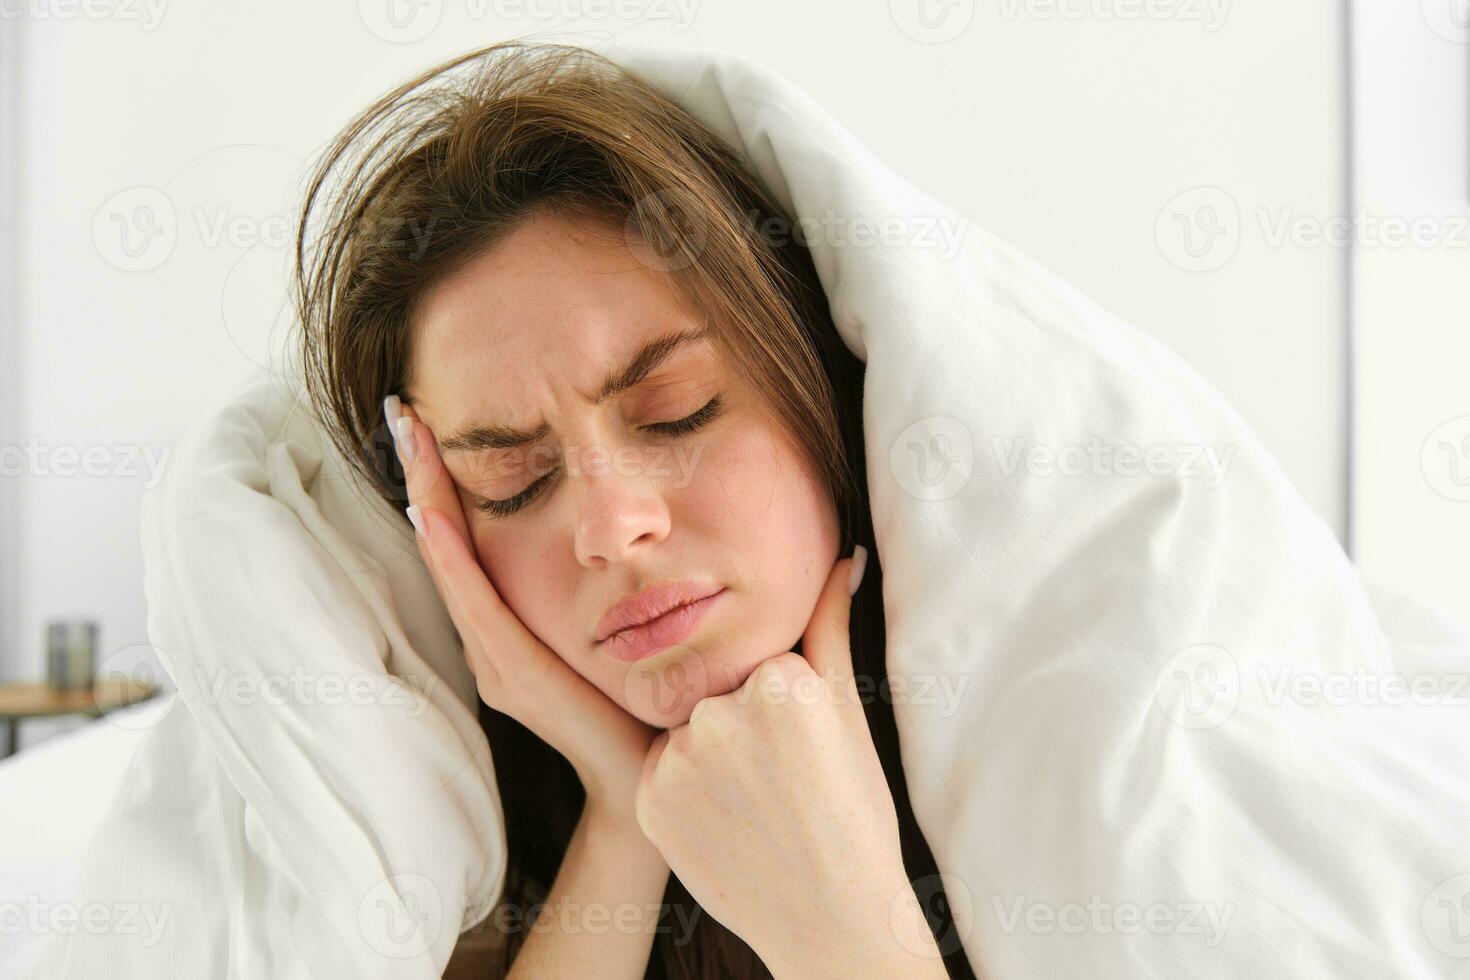 Woman feeling unwell in bed, lying in her bedroom under blanket and white sheets in morning, frowning and touching head, has headache or migraine photo